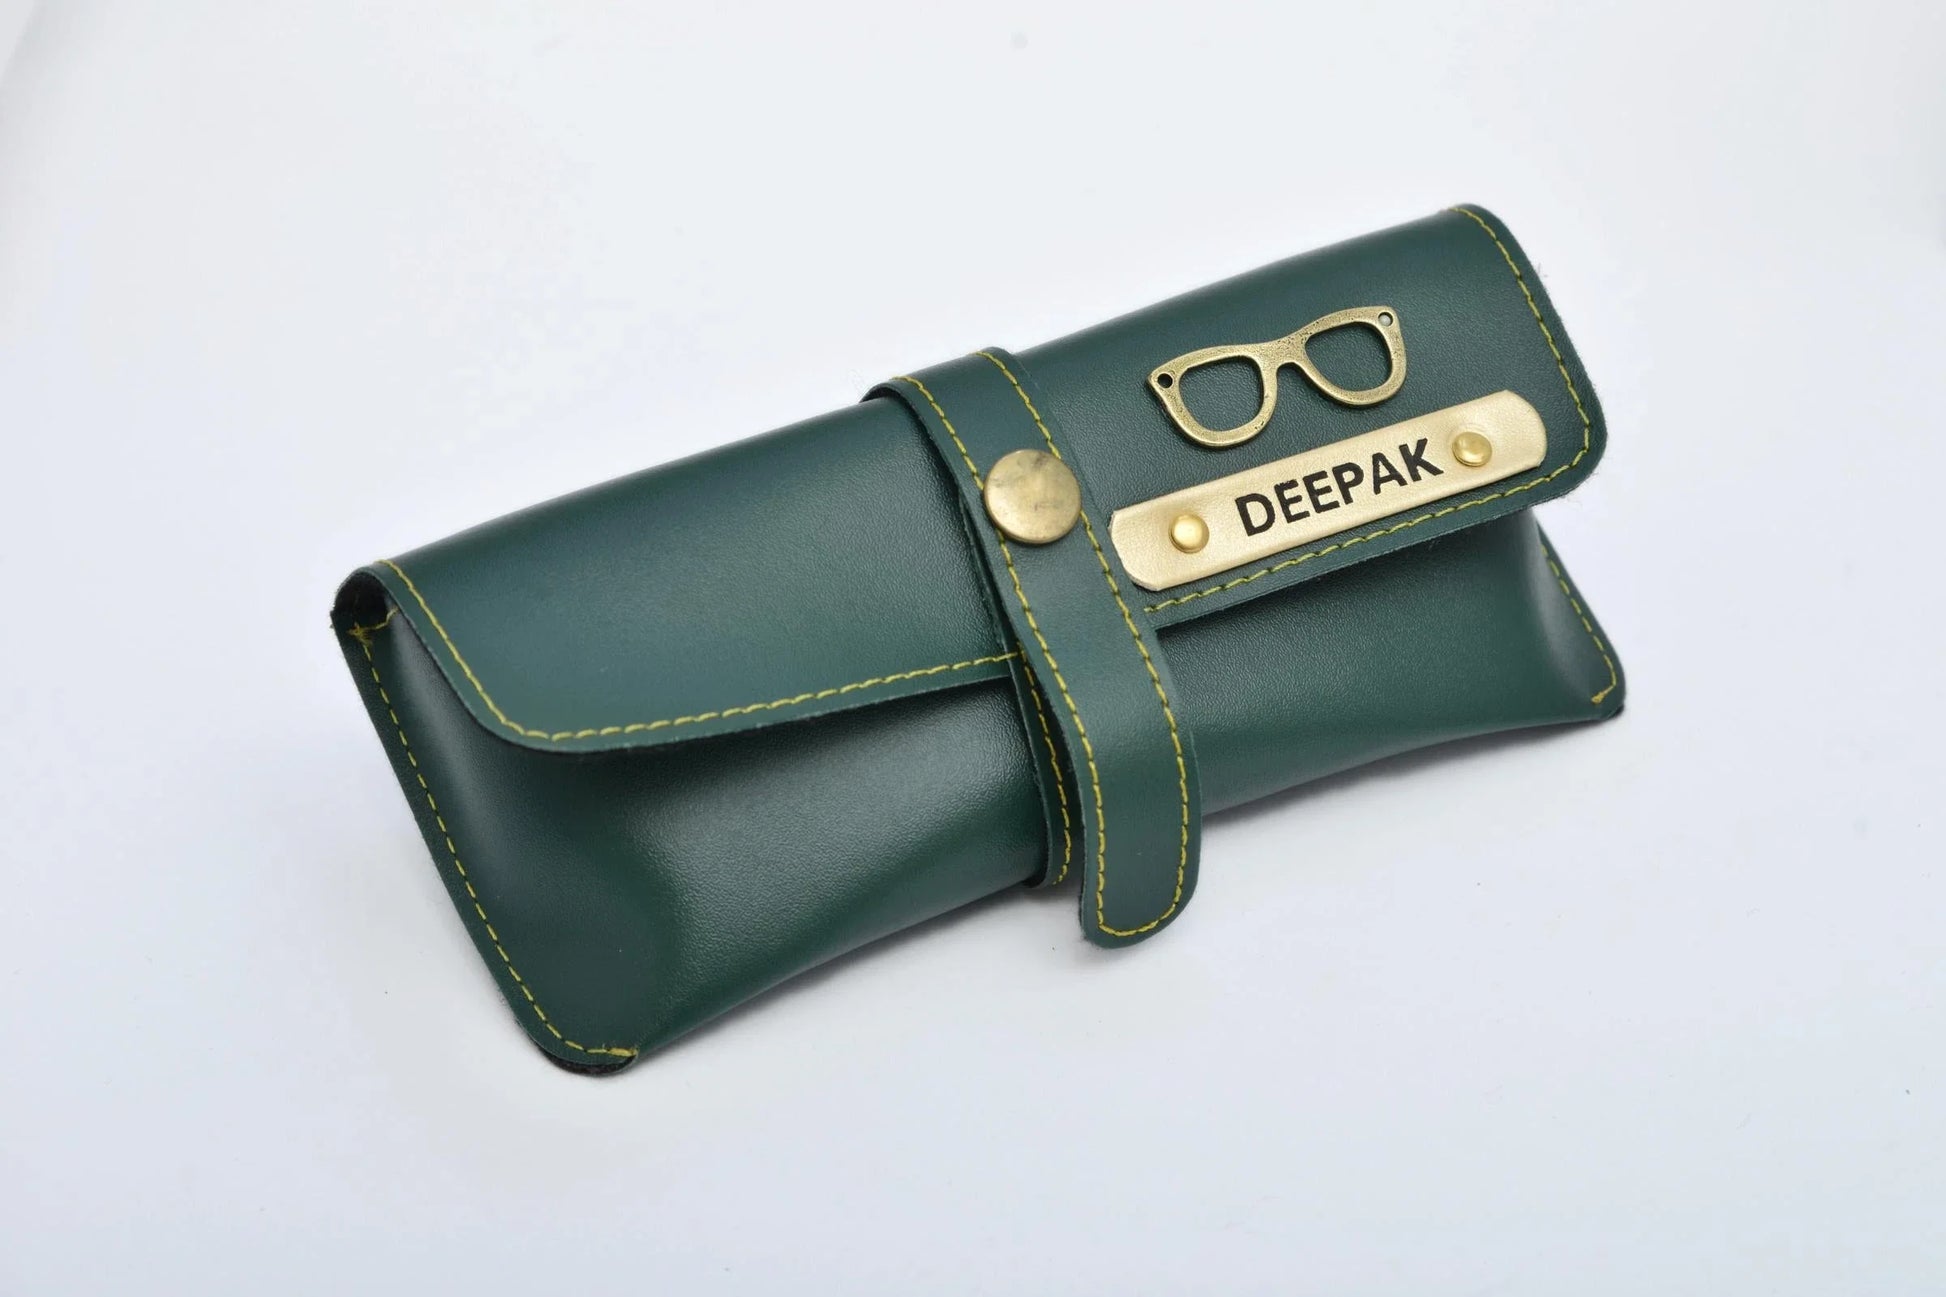 personalized-cb03-olive-green-customized-best-gift-for-boyfriend-girlfriend.So, protect your eyewear too and make it look modern by getting your very own classy, personalized unisex leather glass case.  Add your name and charm to your favourite coloured eyewear case and live in style!   With a royal leathery finish and a top-notch material quality, these personalized unisex glass cases prove to be sturdy while looking stylish. They protect your eyewear from all sorts of stresses!